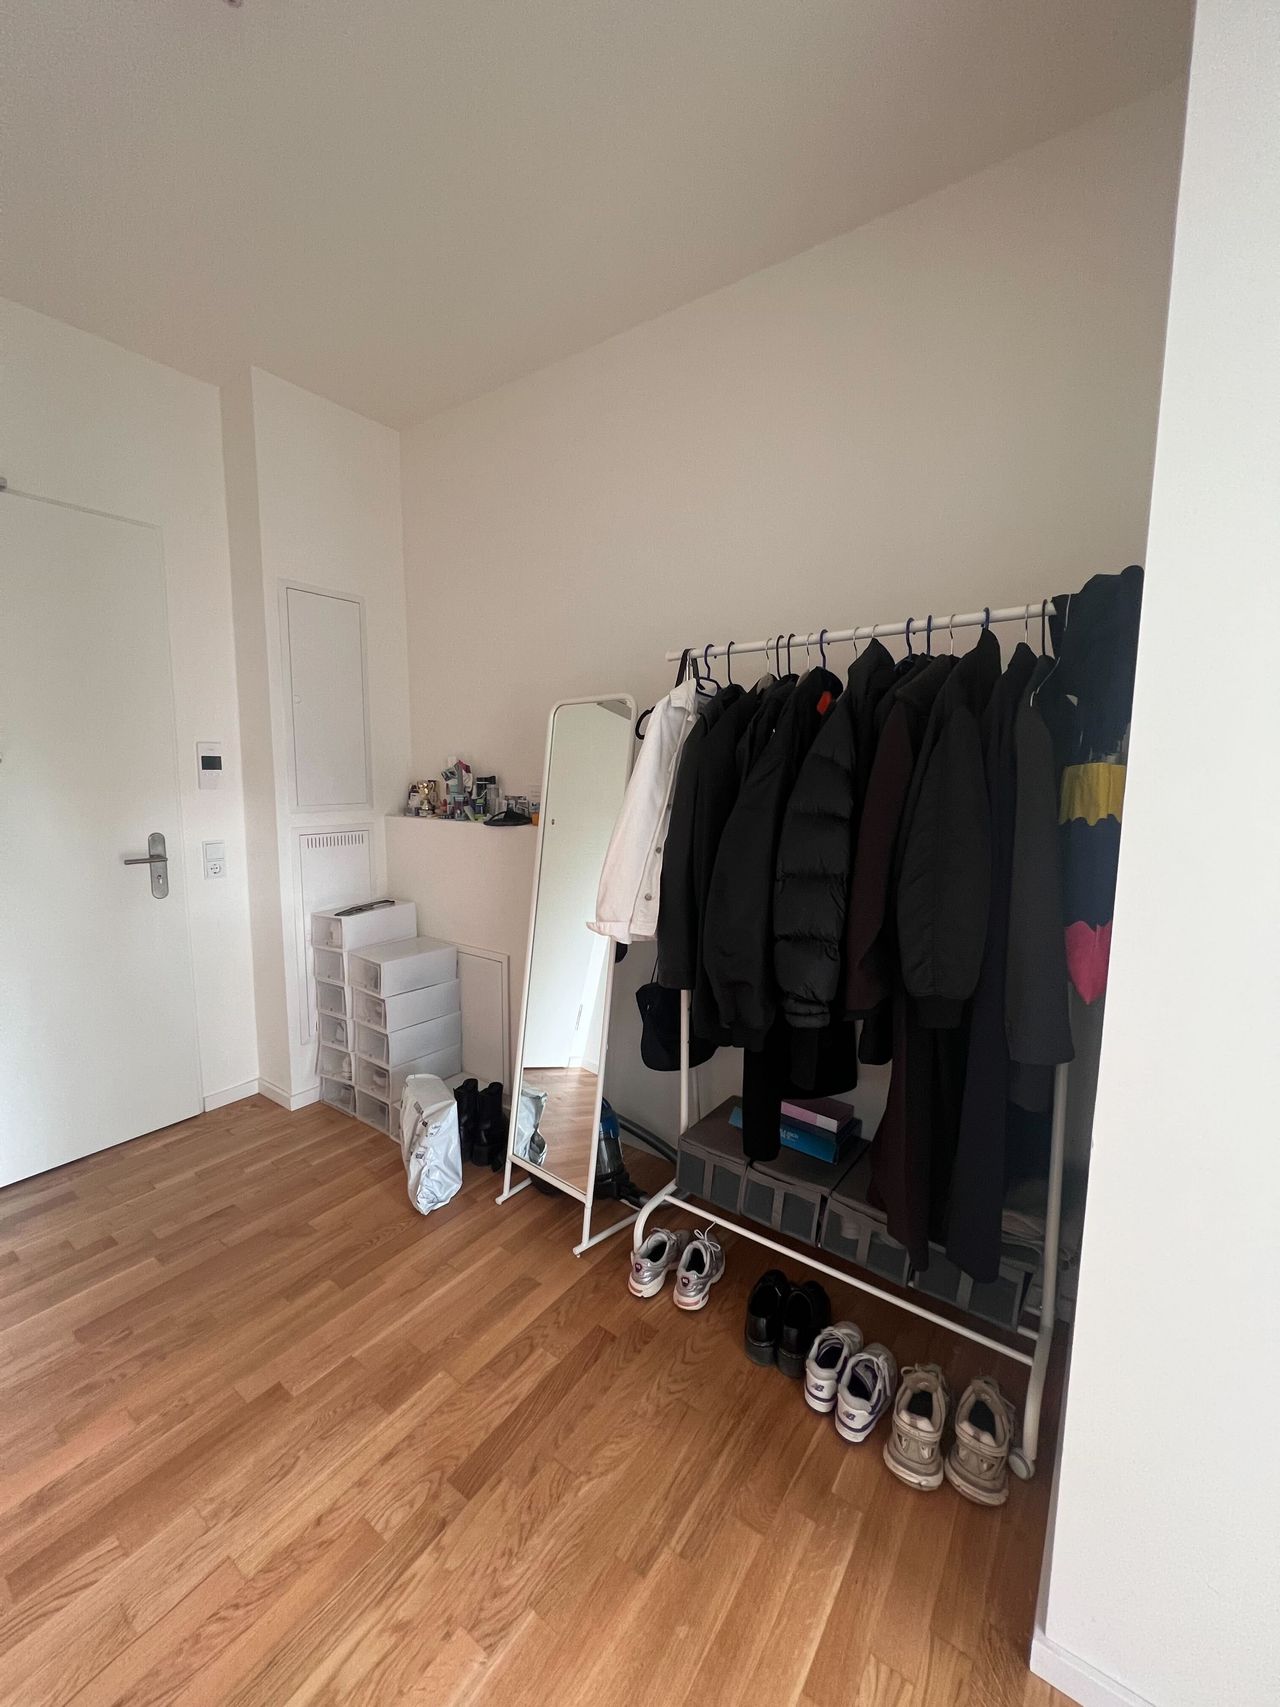 Sunny, fully furnished flat in Mitte, ready for you from July 3rd